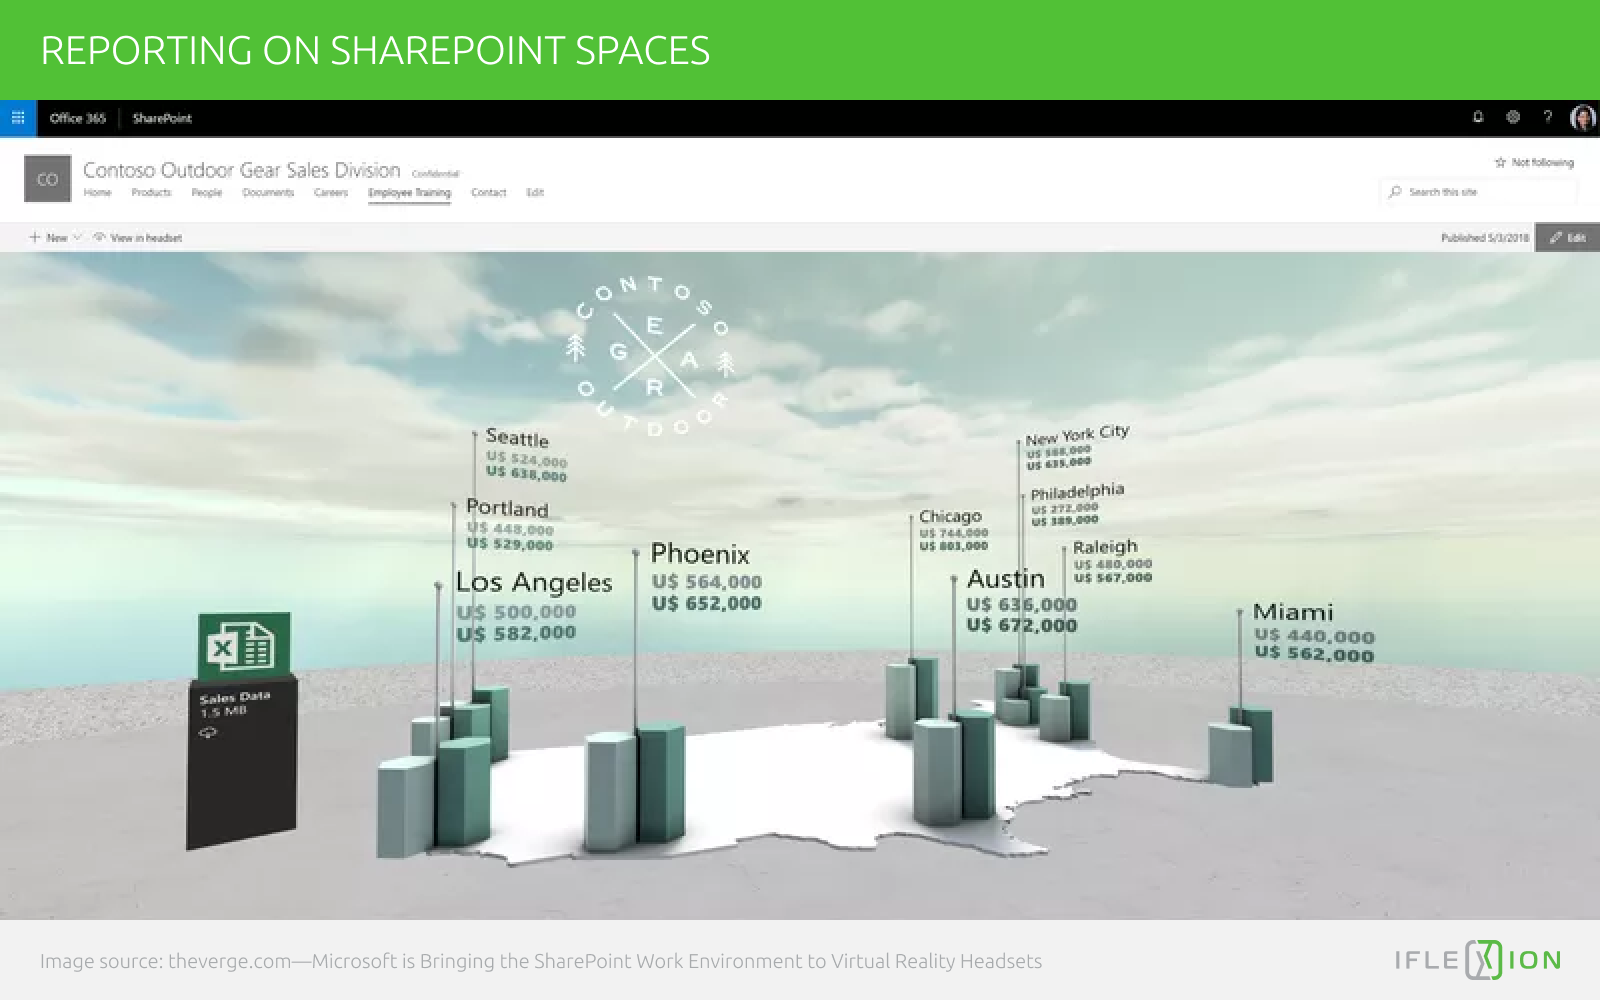 SharePoint Spaces